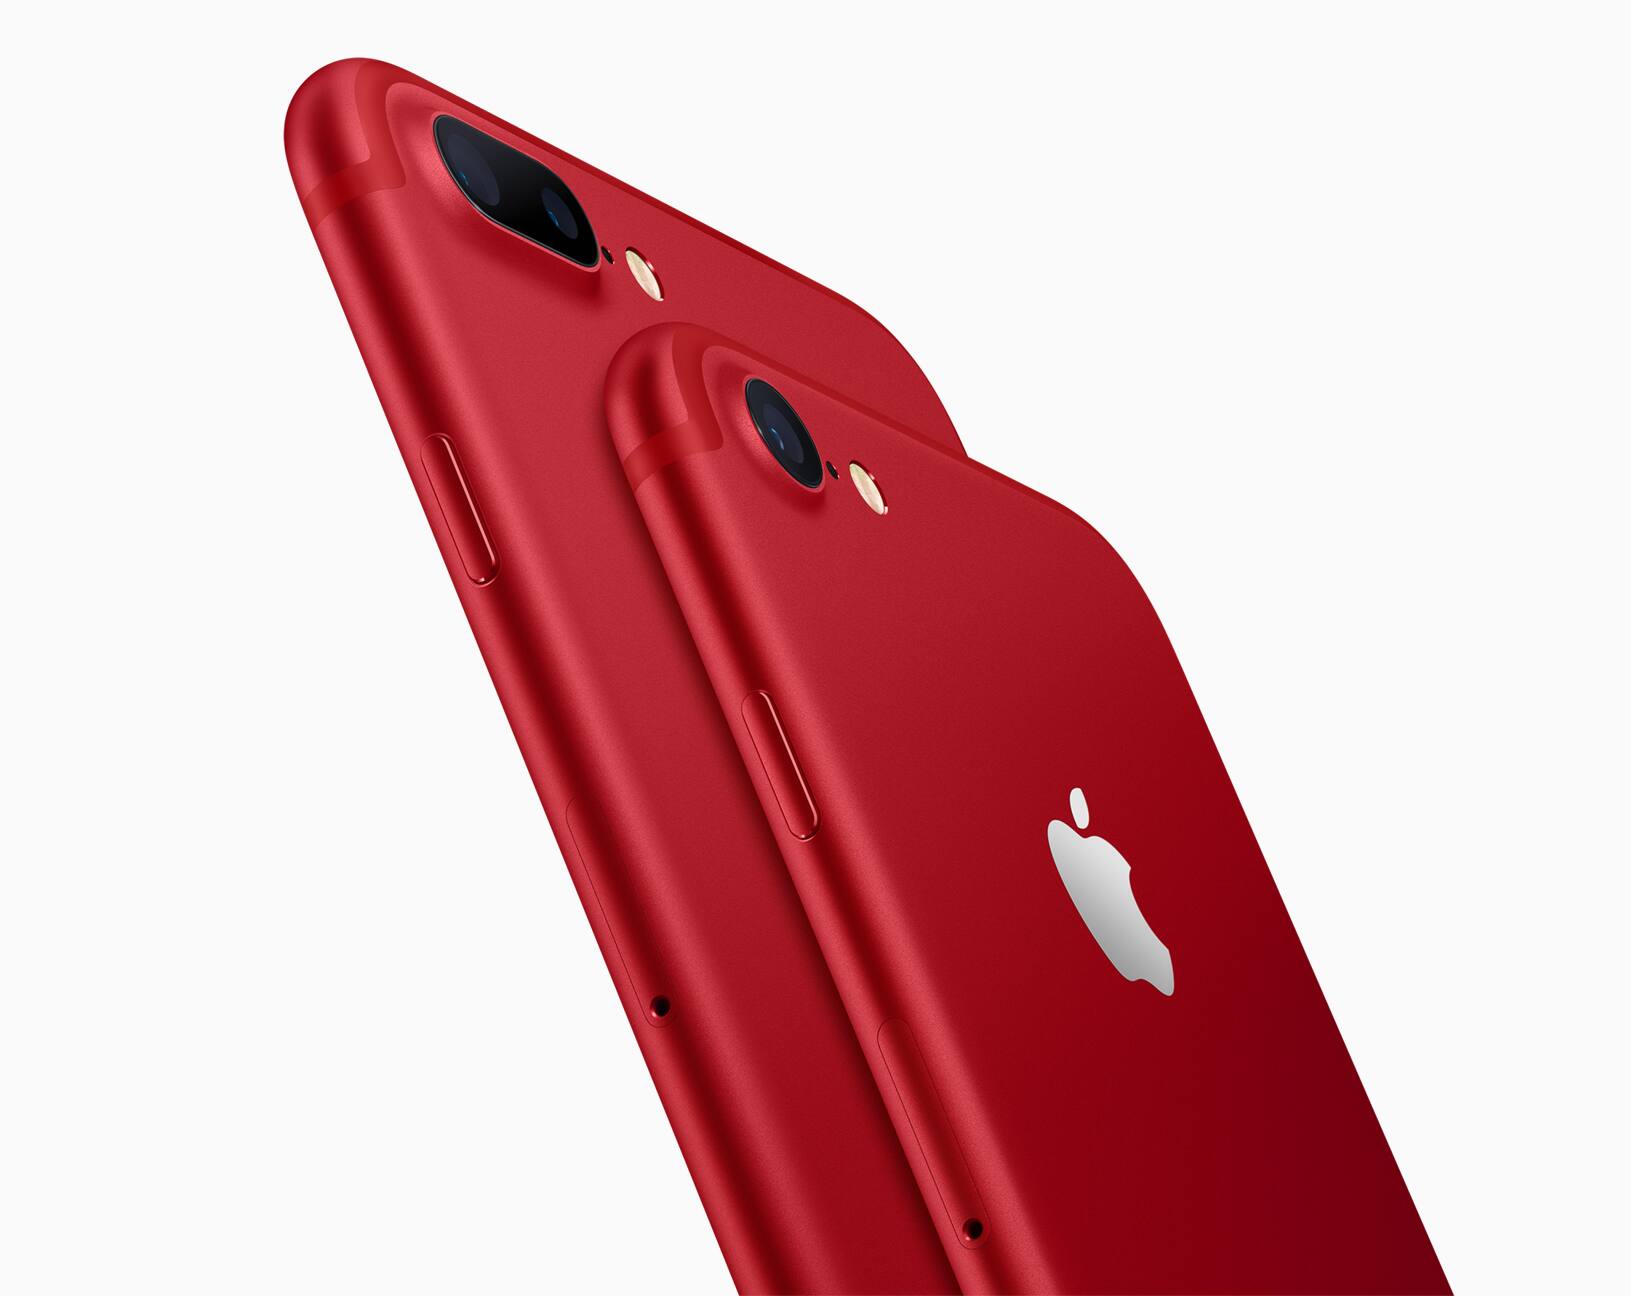 Red iPhone 7 iPhone 7 Plus announced India price starts at Rs 82000